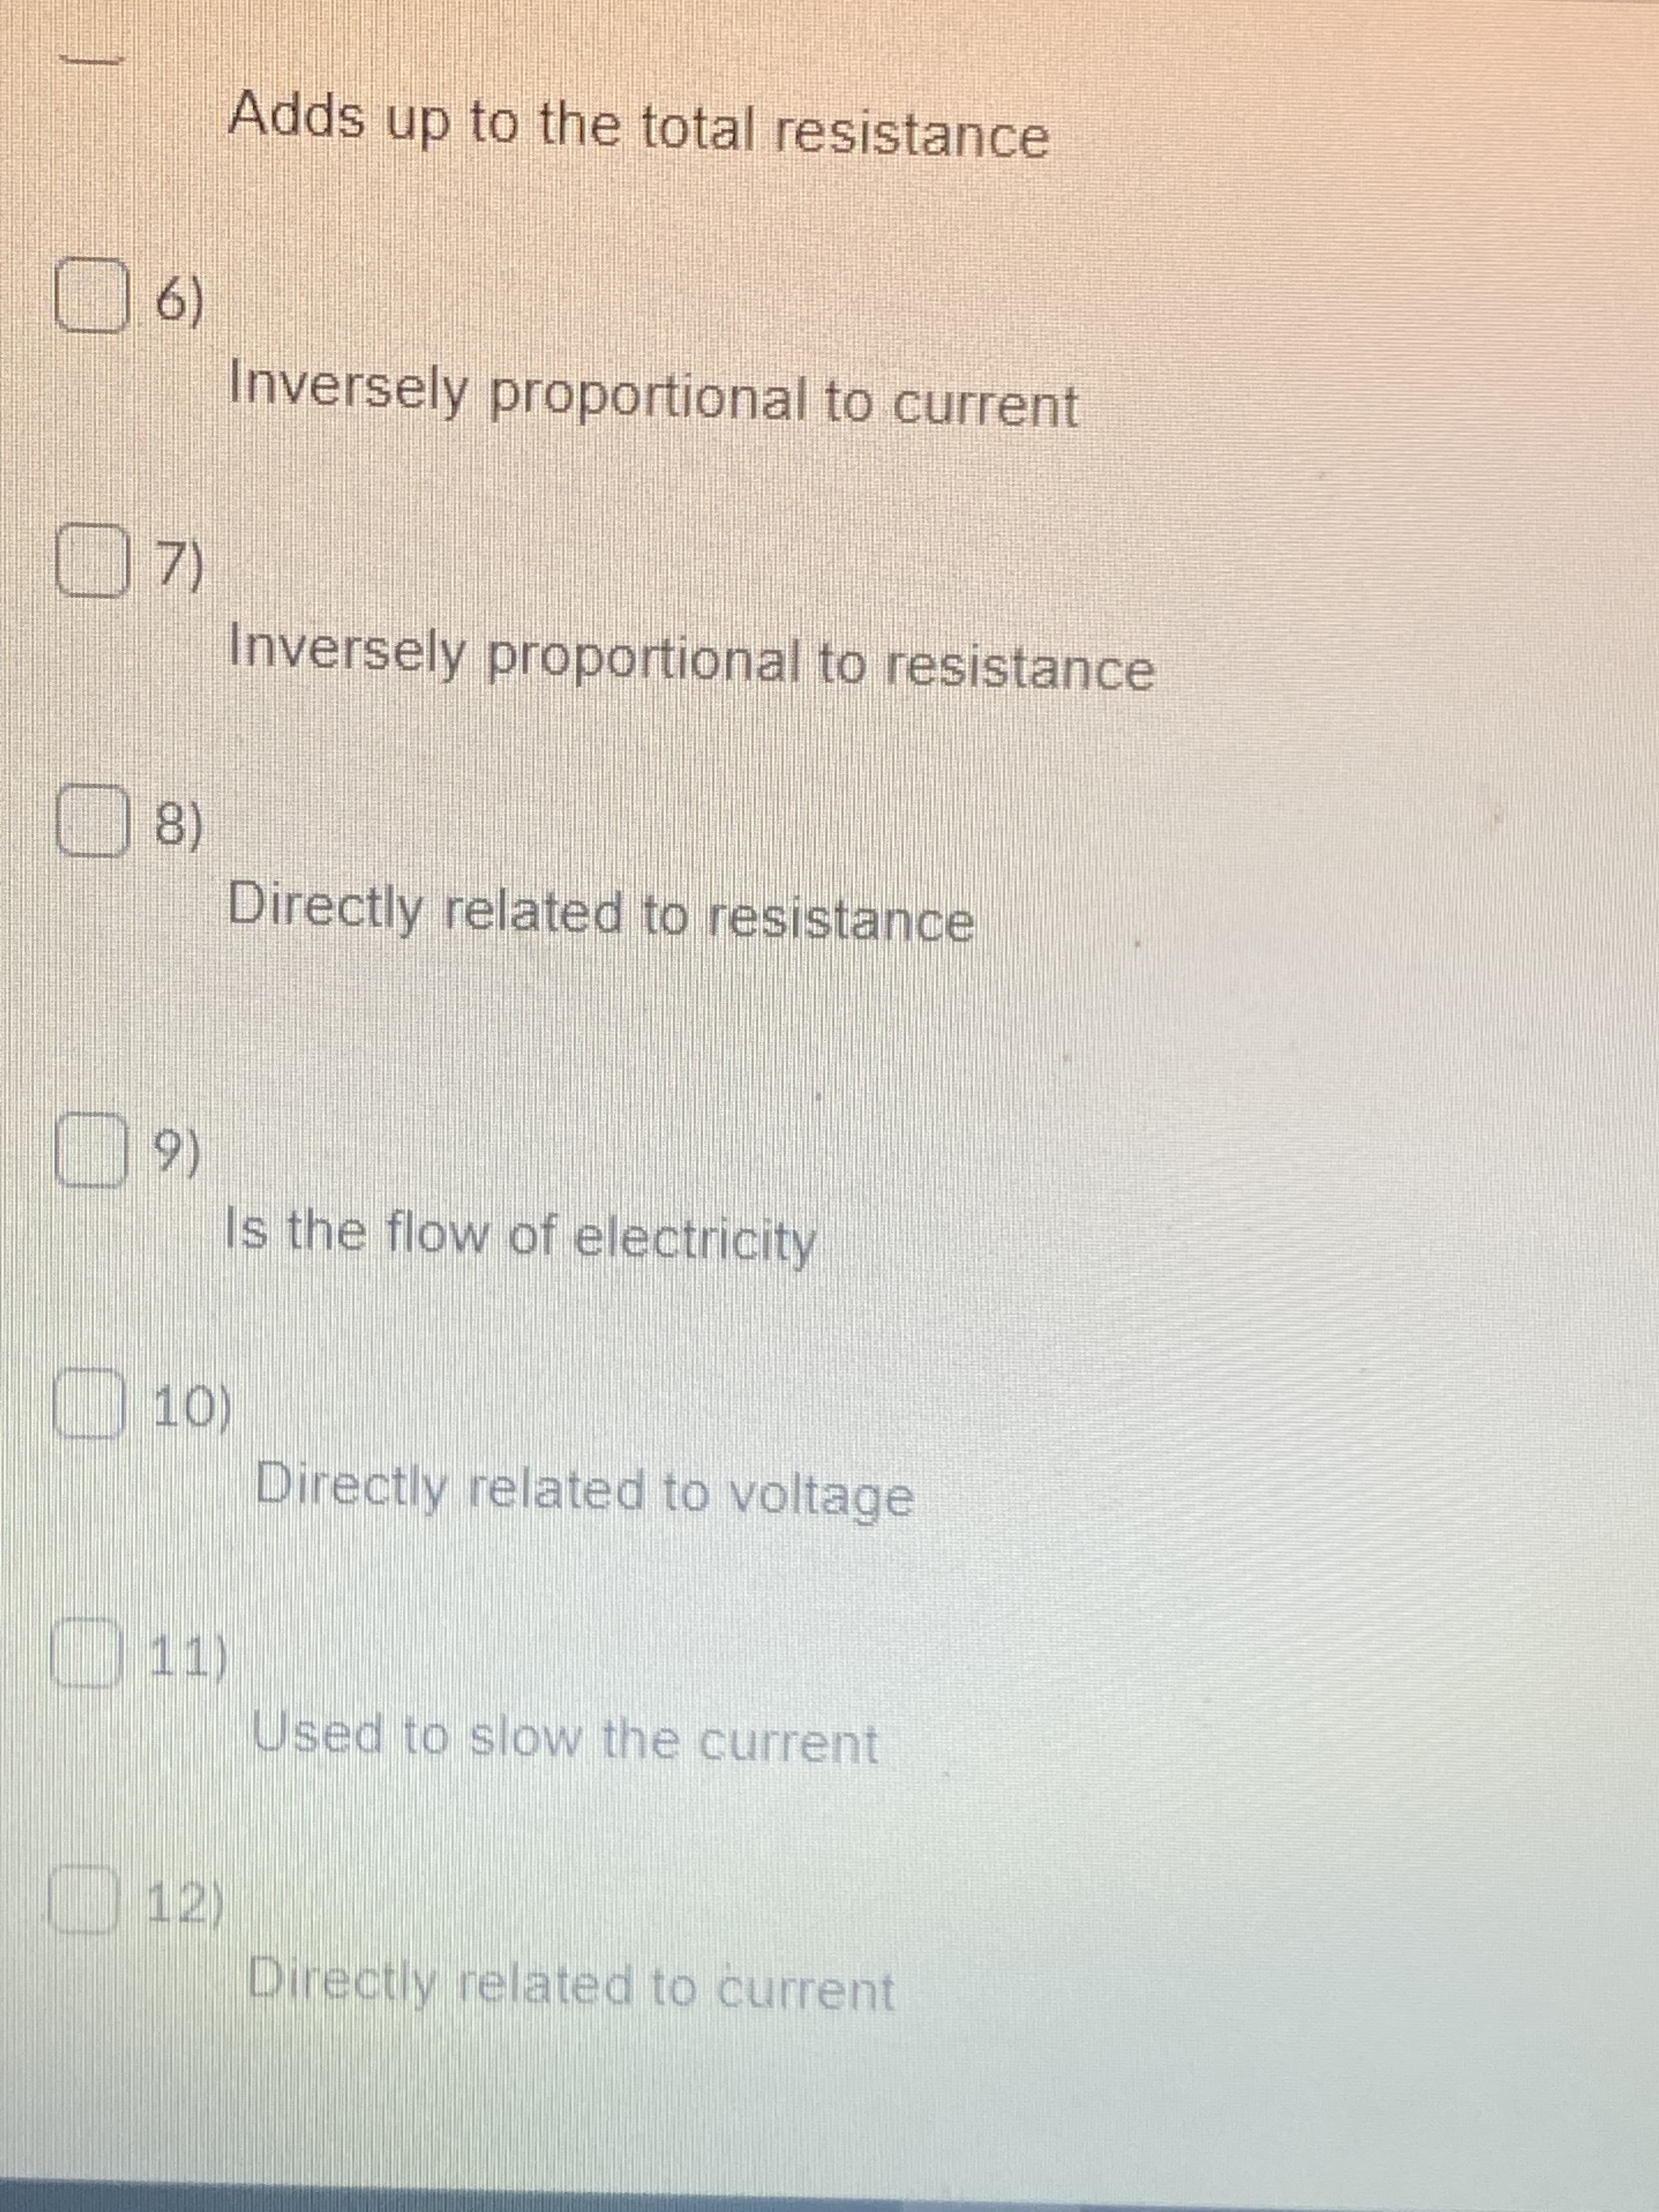 Adds up to the total resistance
(6)
Inversely proportional to current
Inversely proportional to resistance
8)
Directly related to resistance
(6
Is the flow of electricity
10)
Directly related to voltage
11)
Used to slow the current
12)
Directly related to current
